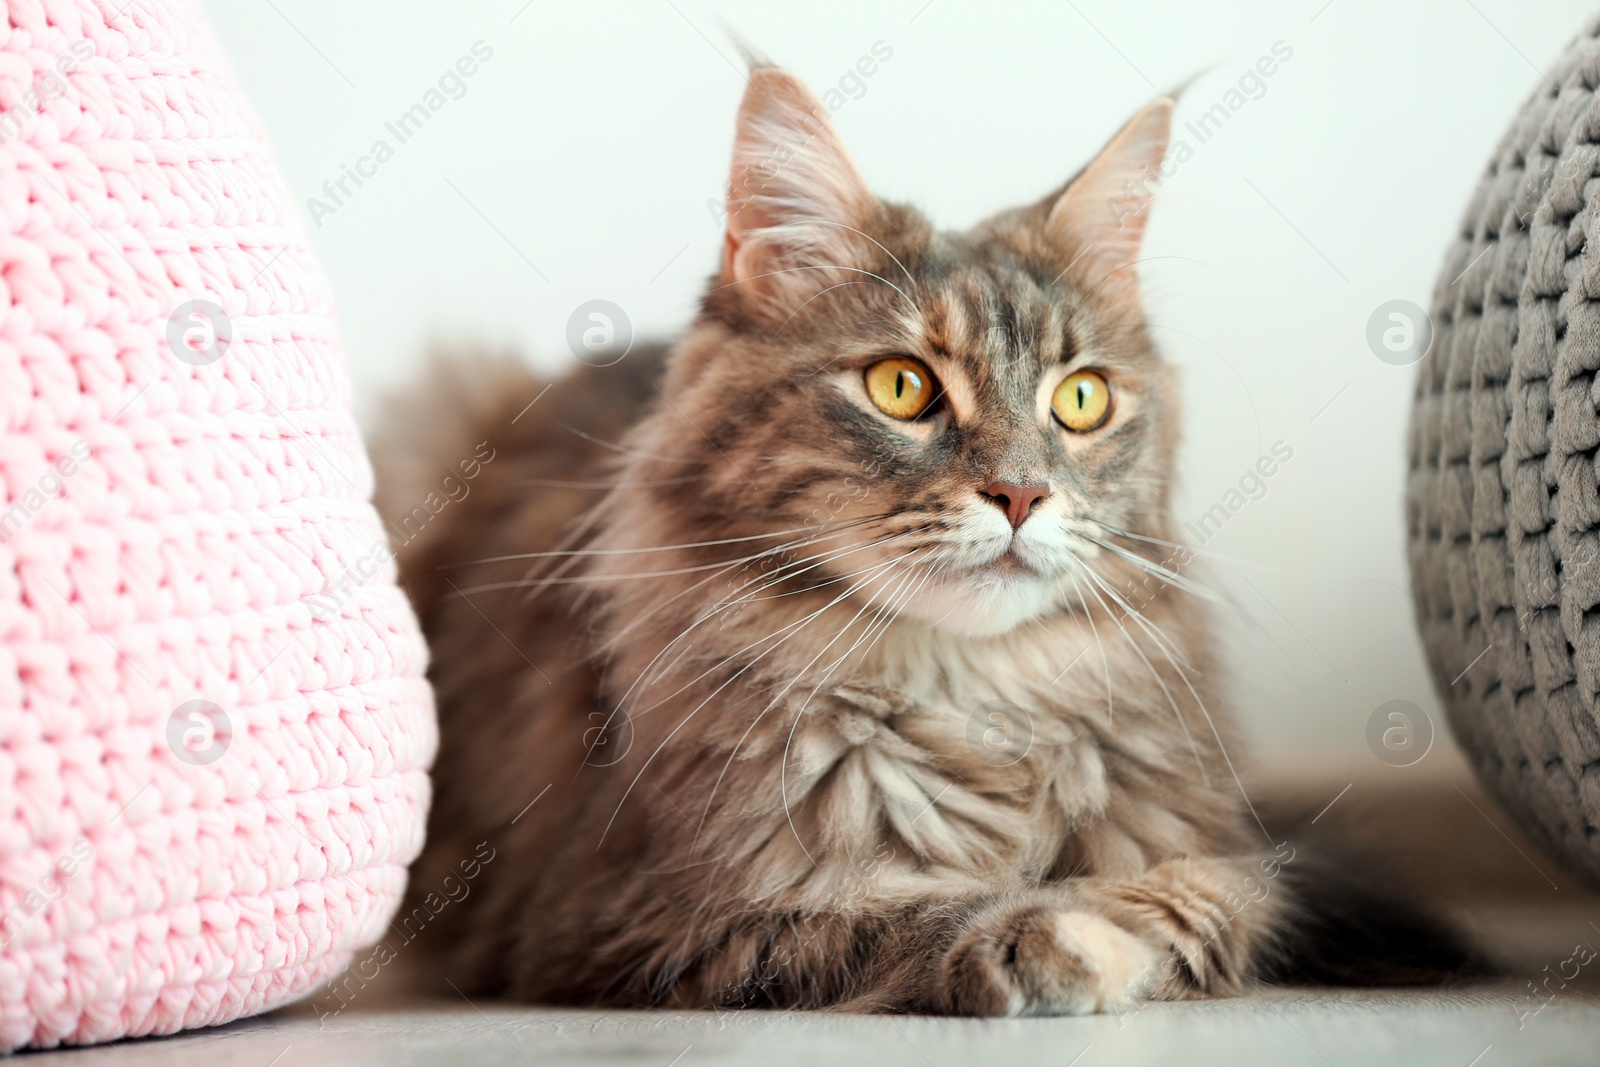 Photo of Adorable Maine Coon cat near poufs on floor at home